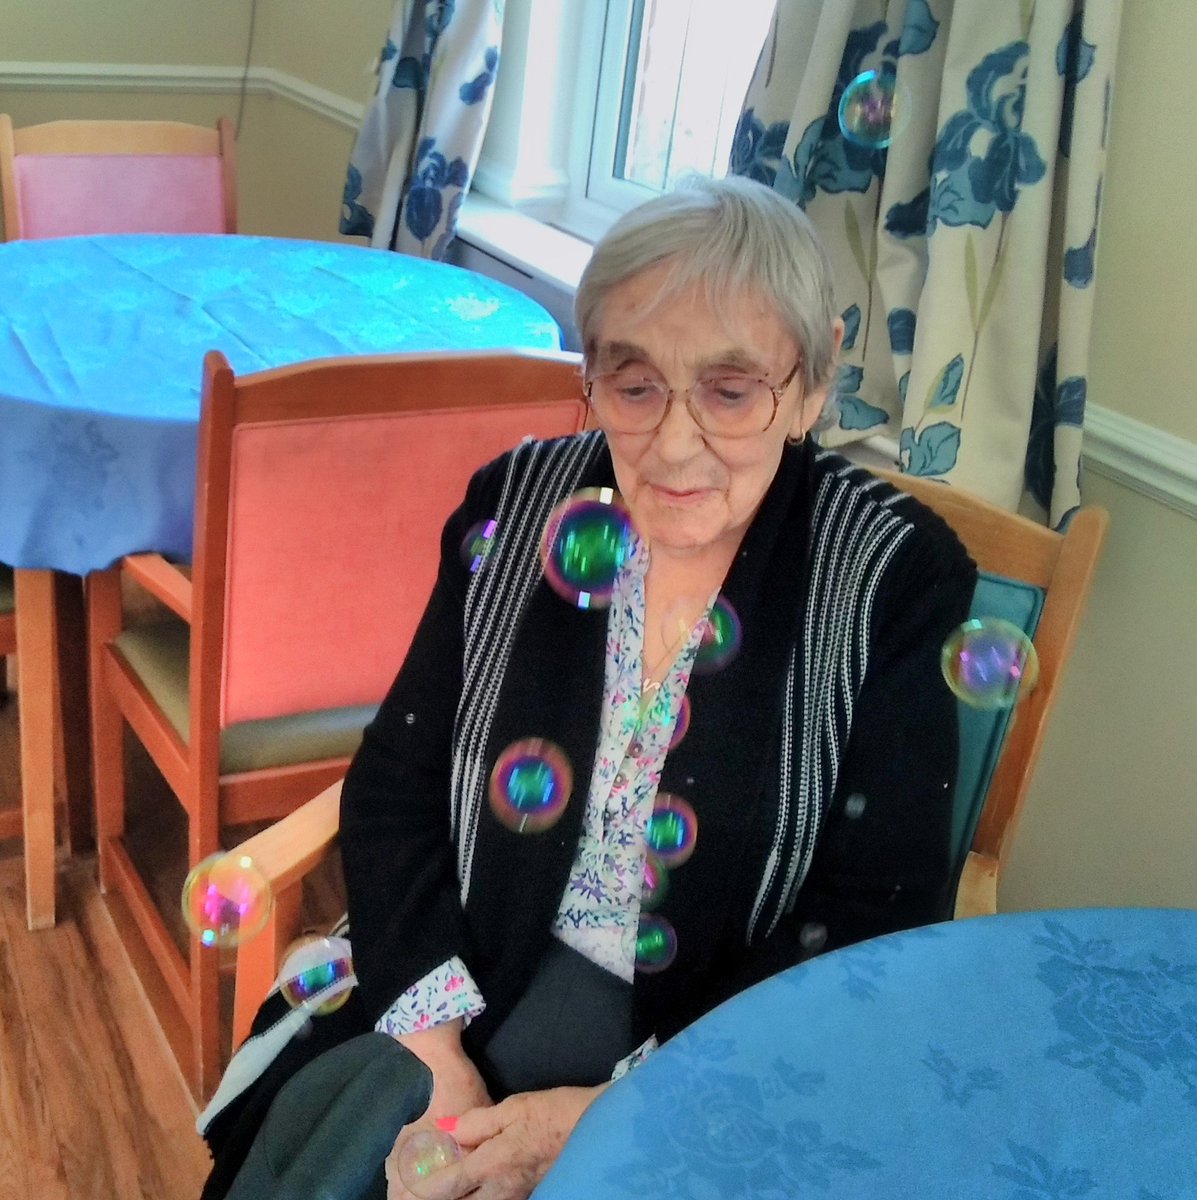 Fun with bubbles this morning #hicaactivities #bridlington #carehome